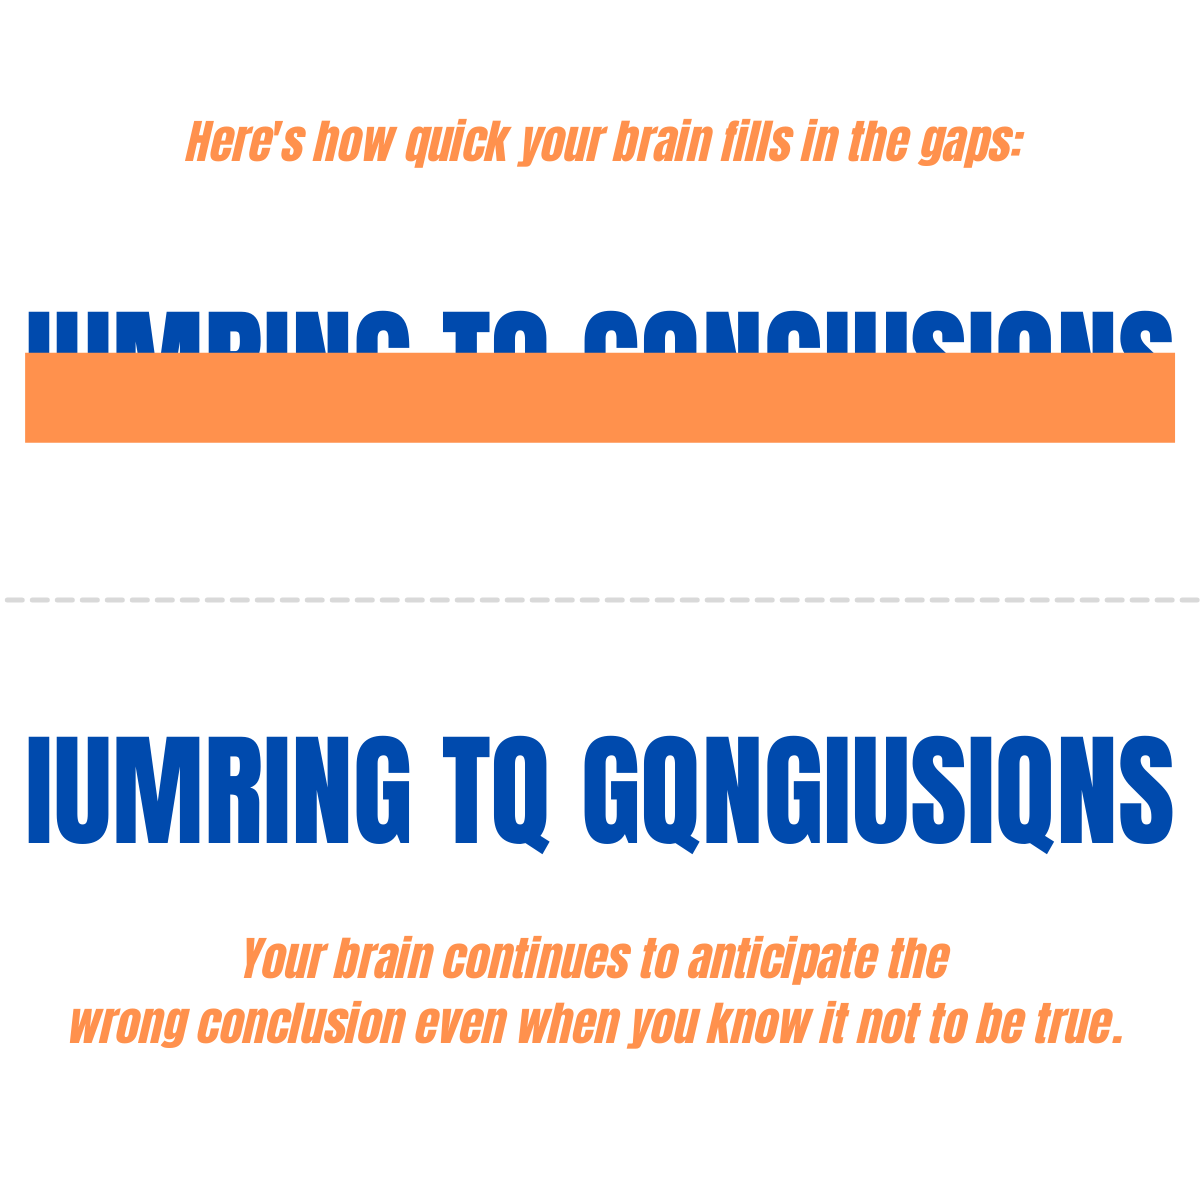 Blog graphic illustrating concept of how "jumping to conclusions" can lead to erroneous assumptions | Park Avenue Solutions